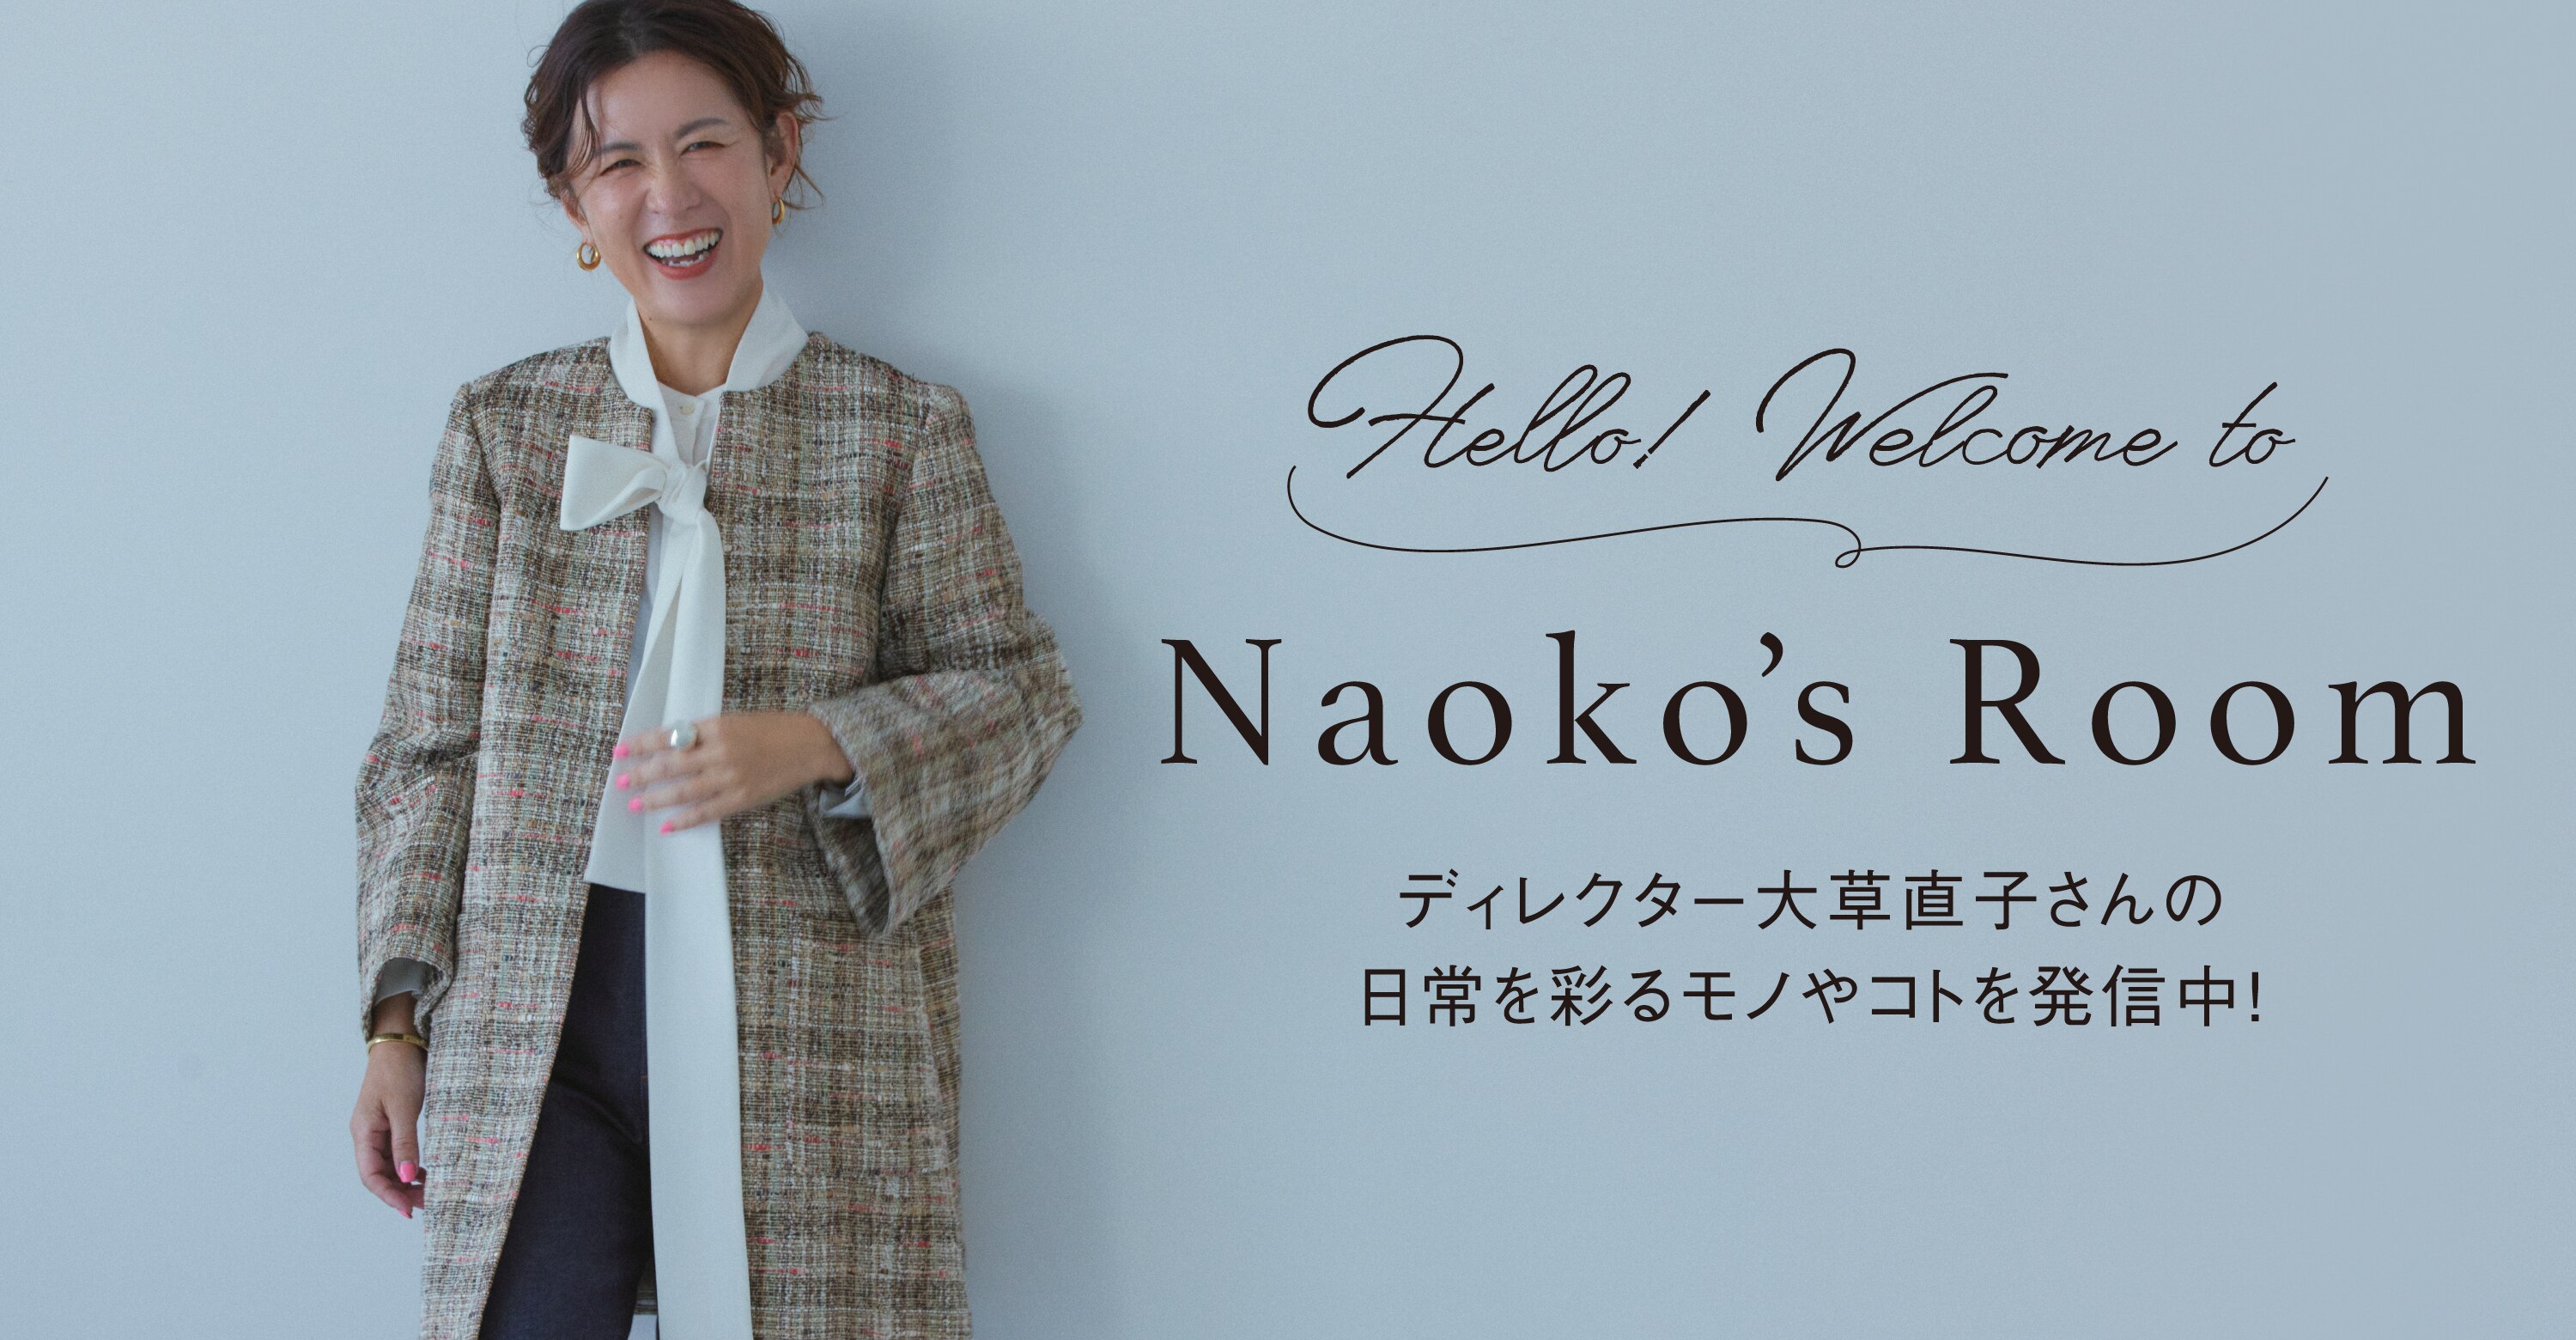 Hello! Welcome to Naoko's Room　ディレクター大草直子さんの日常を彩るモノやコトを発信中！